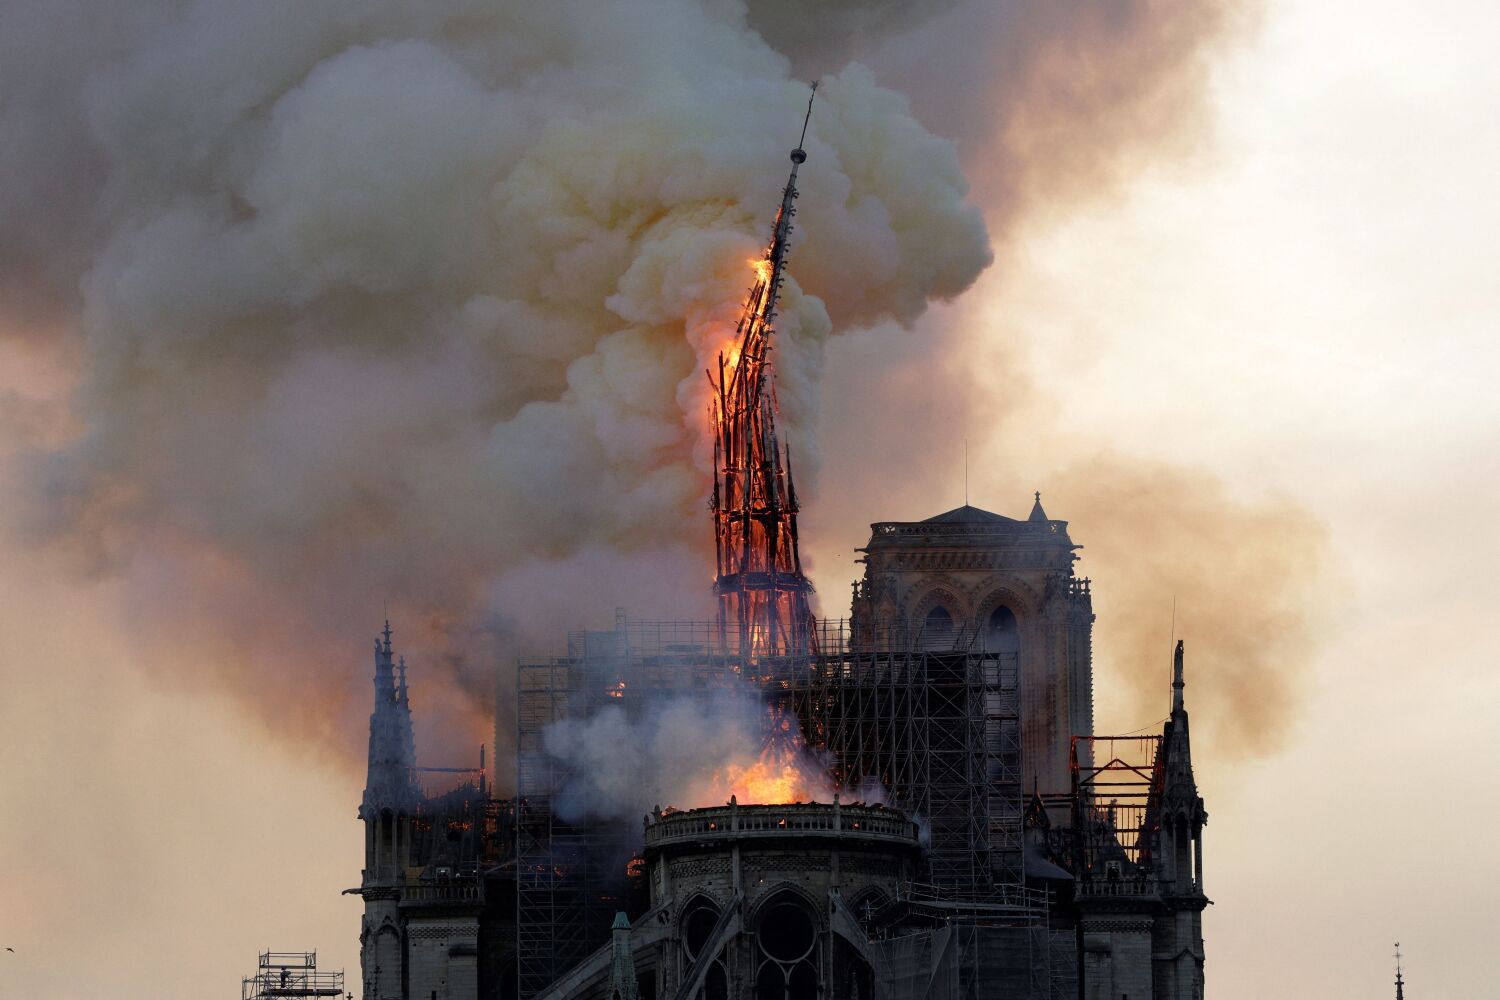 Notre Dame cathedral's iconic spire fell in flames. Now it is set to rise again